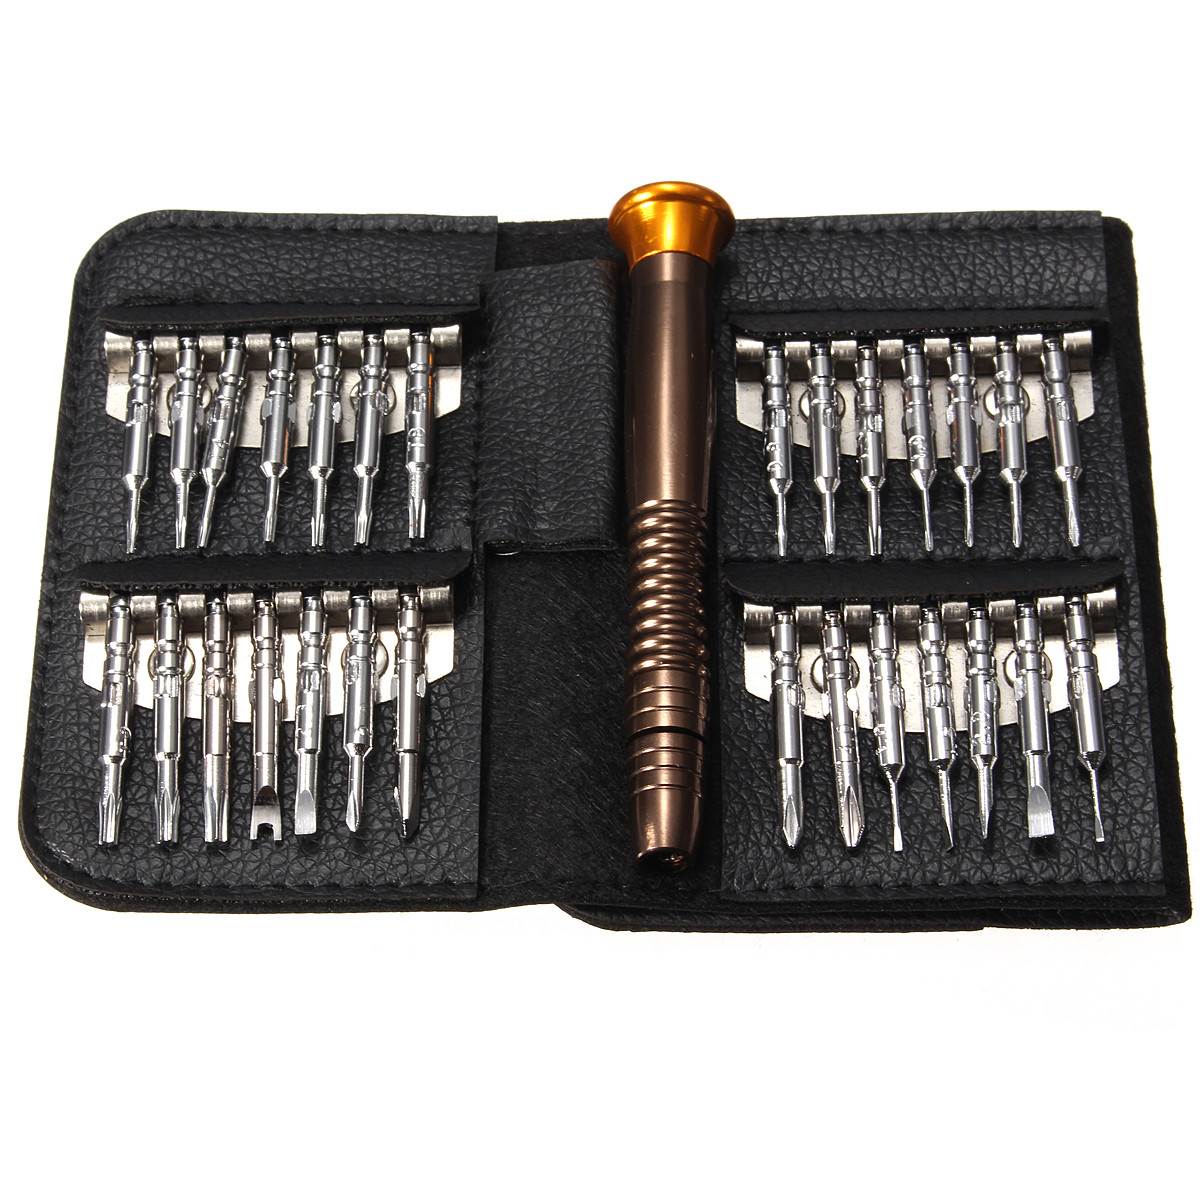 29 in 1 Precision Hand Screwdriver Wallet Set Repair Tools For PC Cellphone Tool